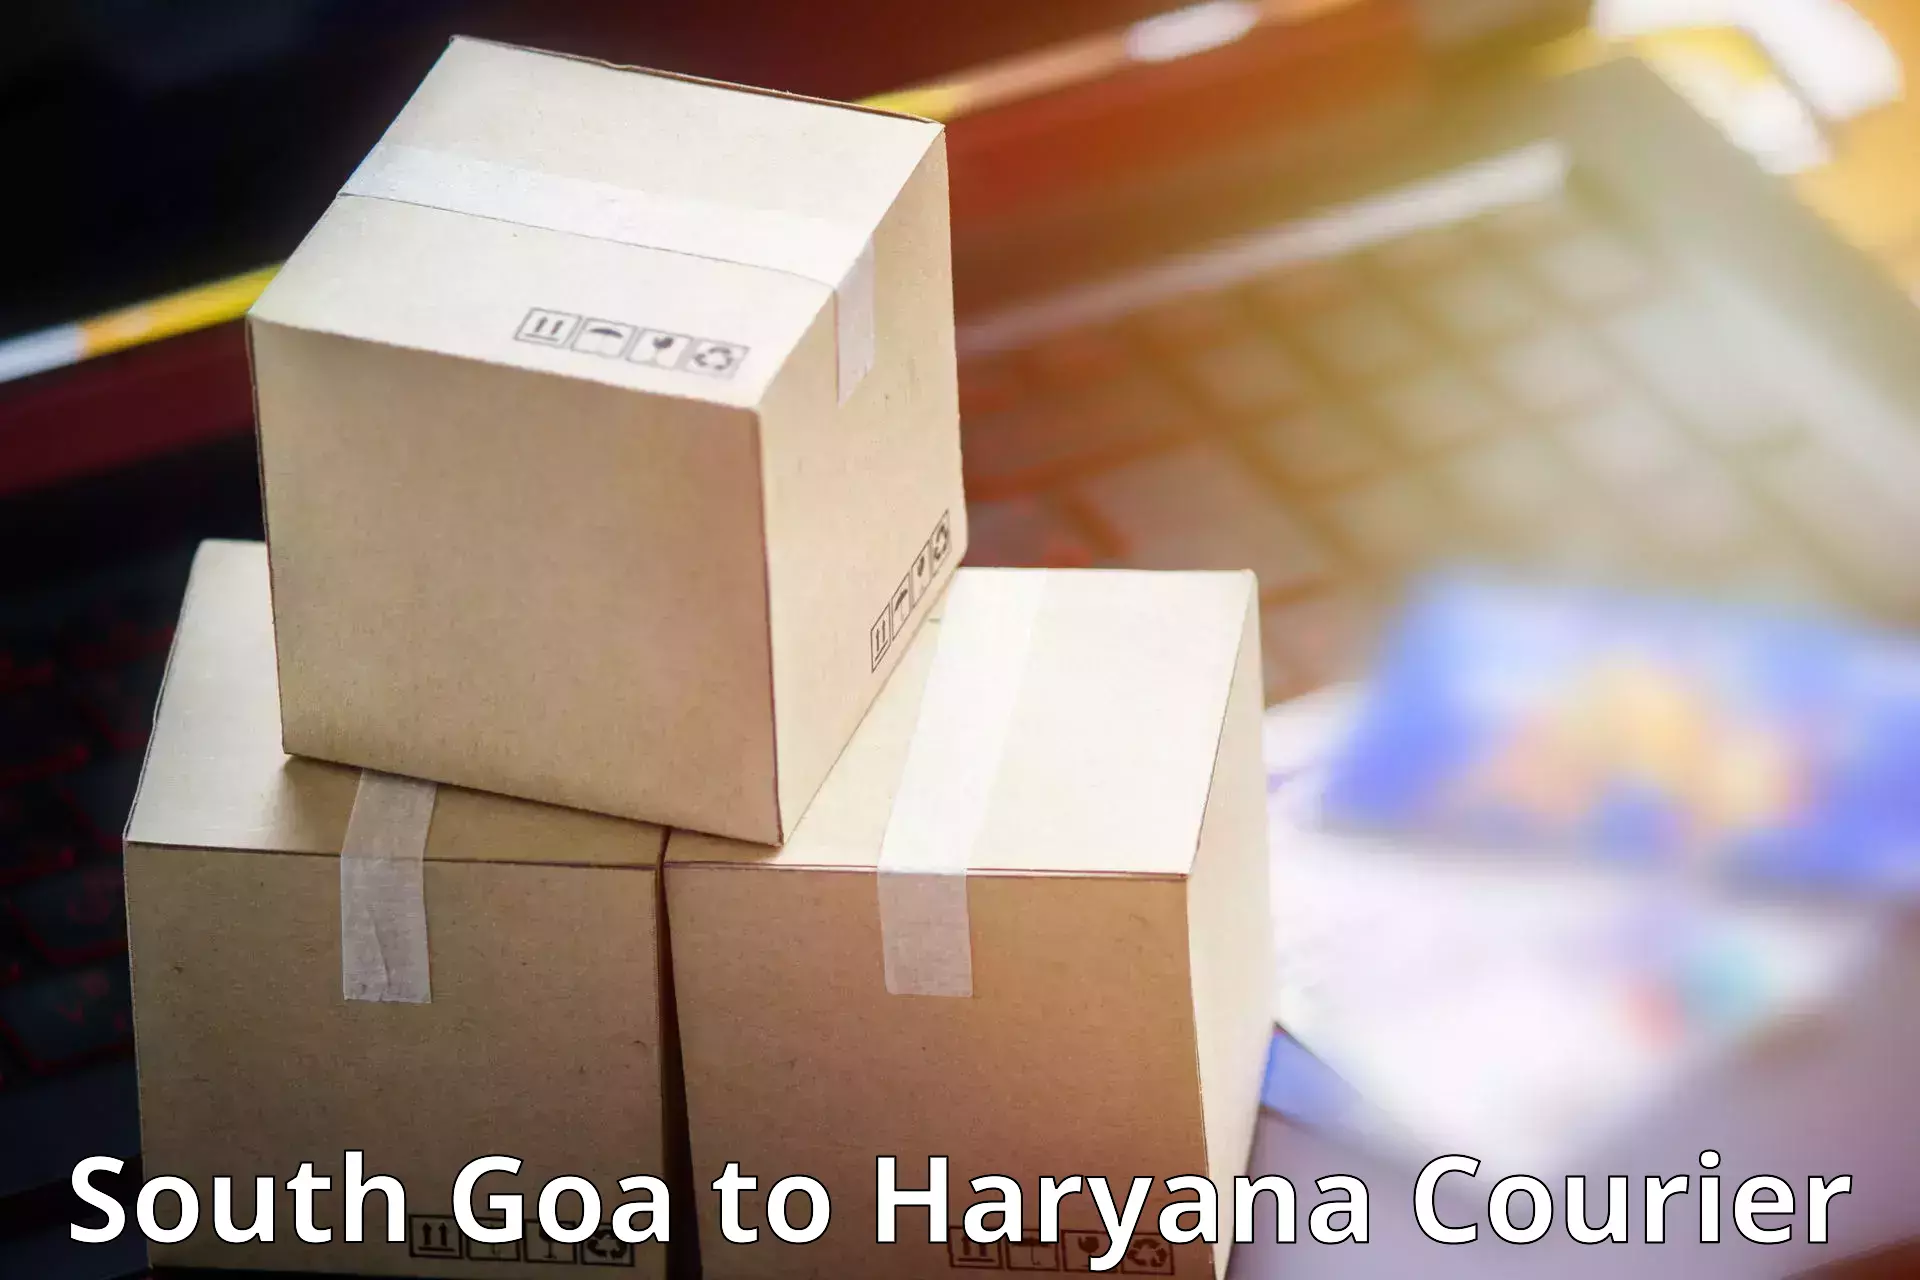 Individual parcel service South Goa to Assandh